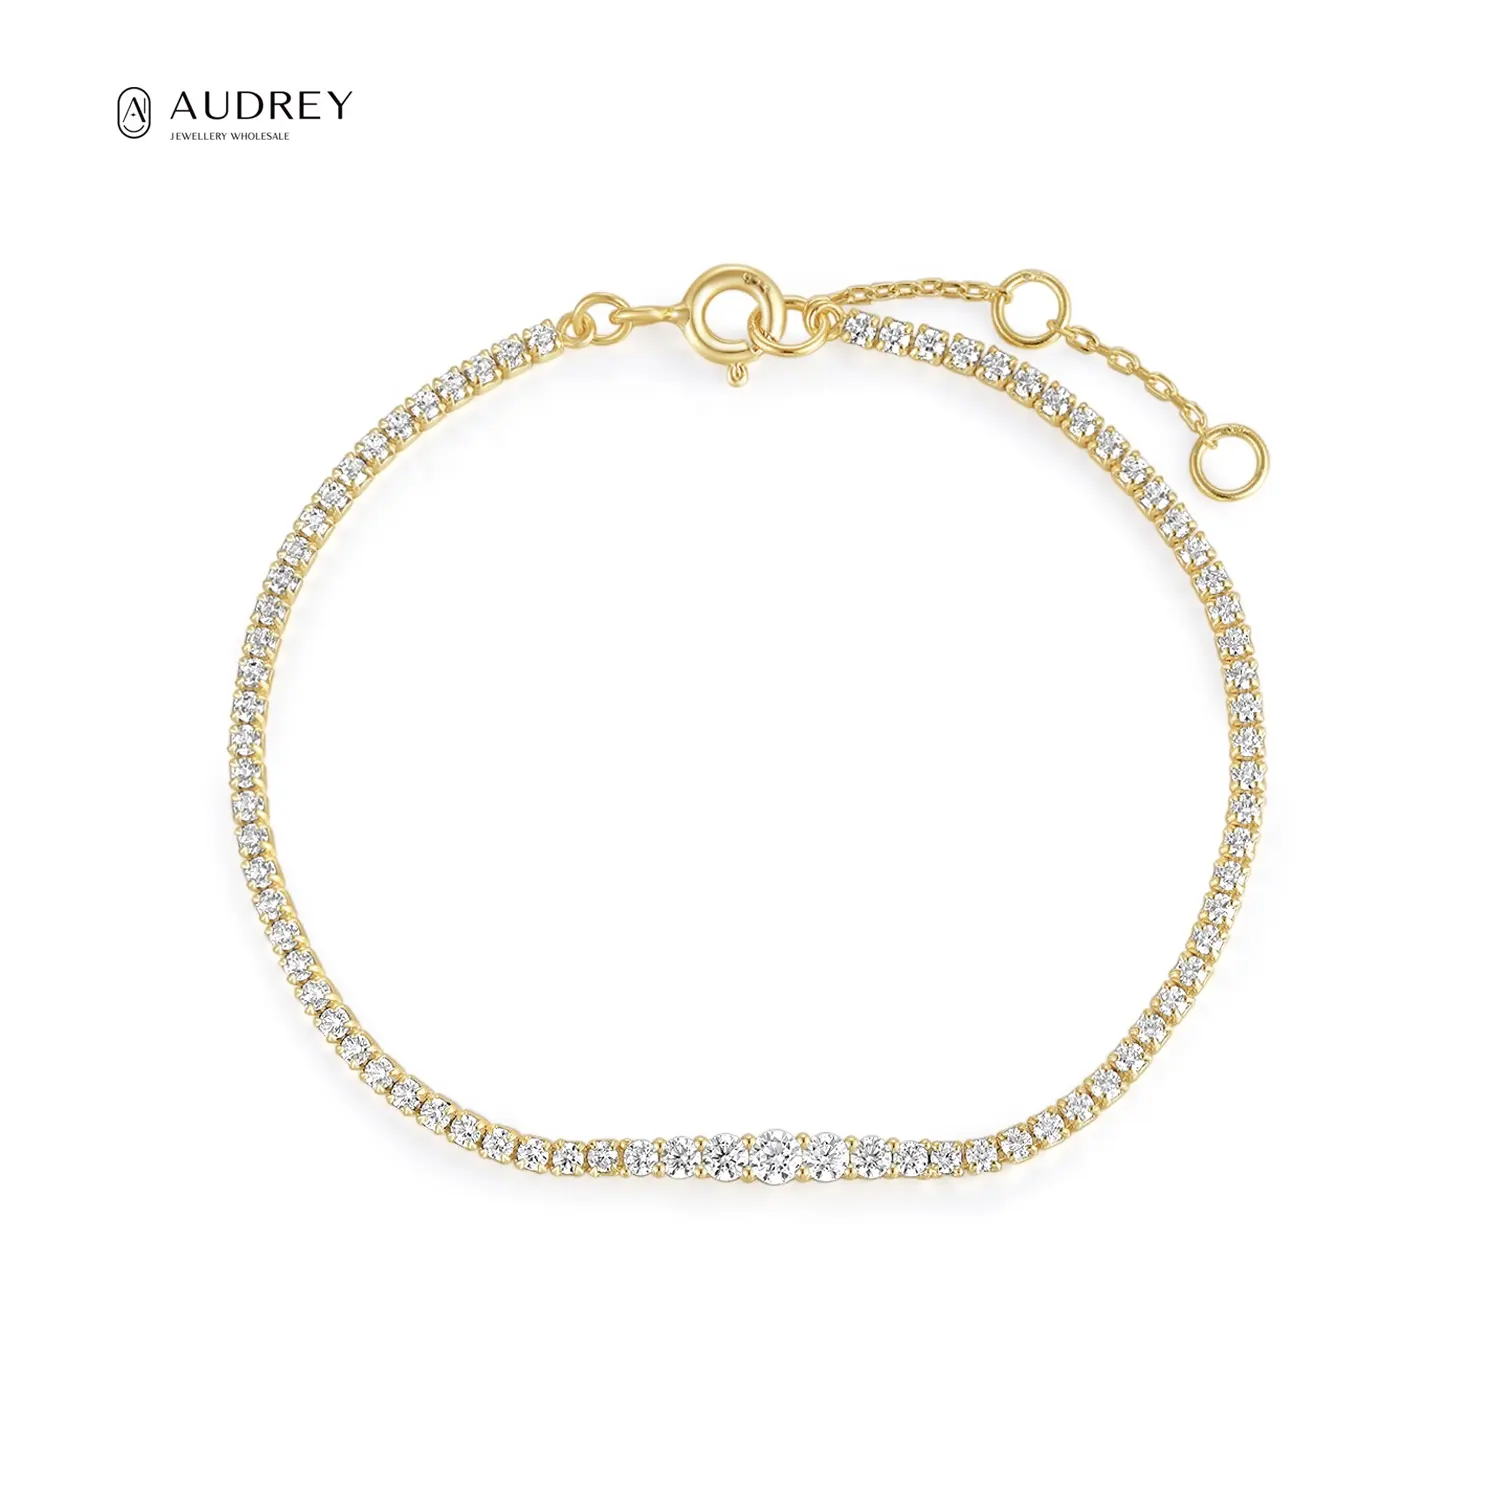 Audrey Classic Design Fine Jewellery 14k Plated Gold 925 Sterling Silver Sparkling Zircon Tennis Bracelet Chain For Ladies